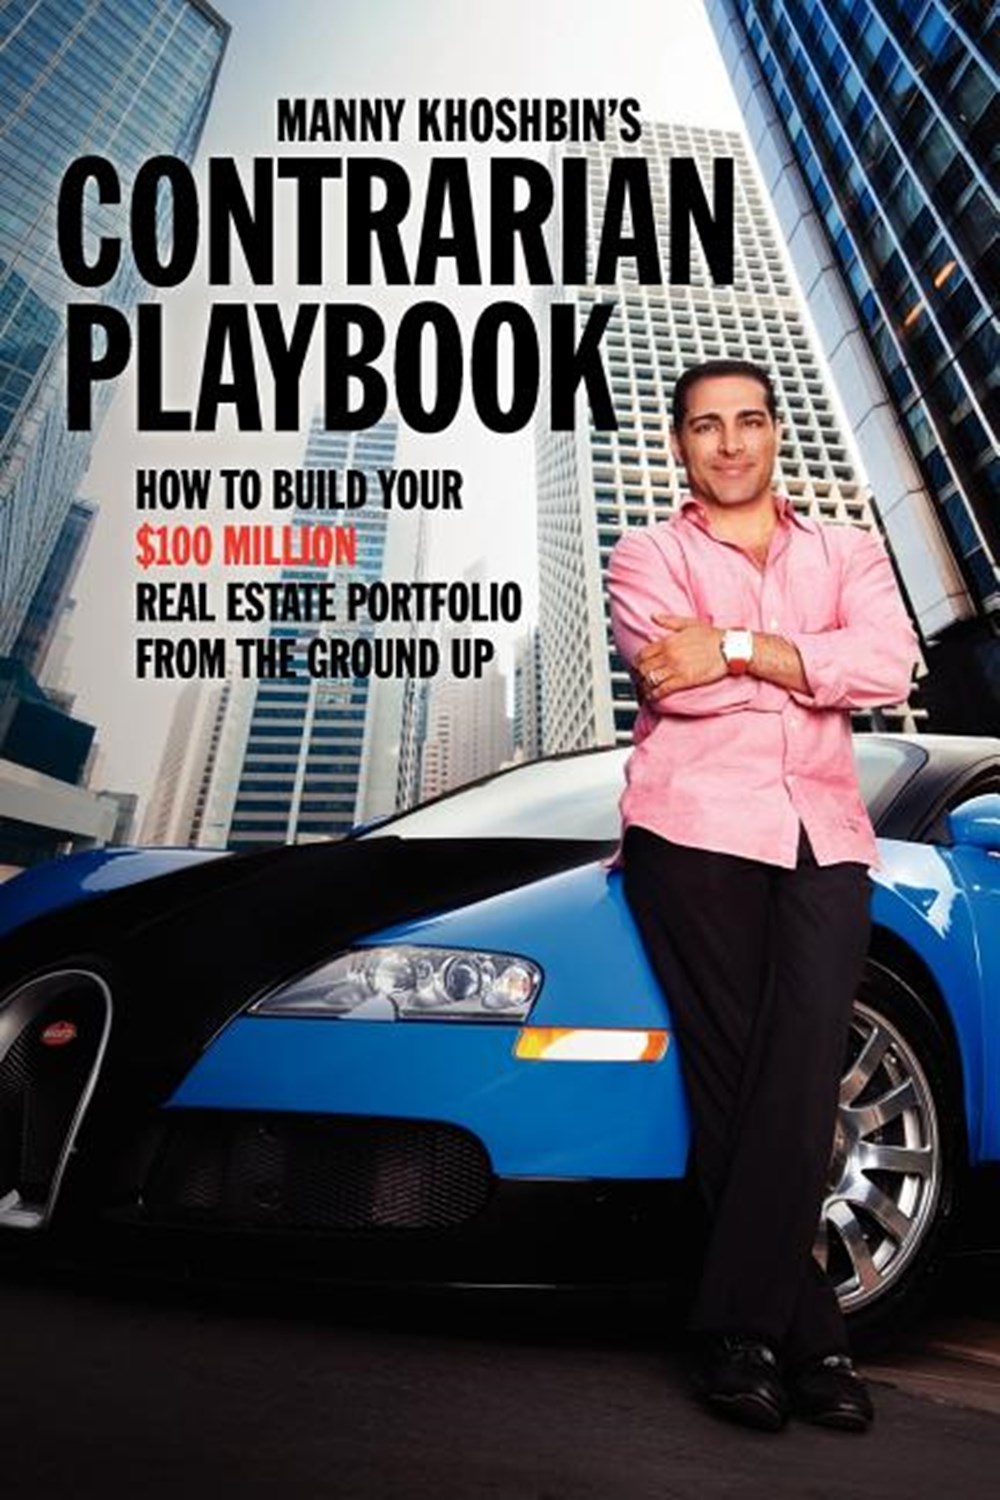 Manny Khoshbin's Contrarian PlayBook: How to Build Your $100 Million Real Estate Portfolio From the 